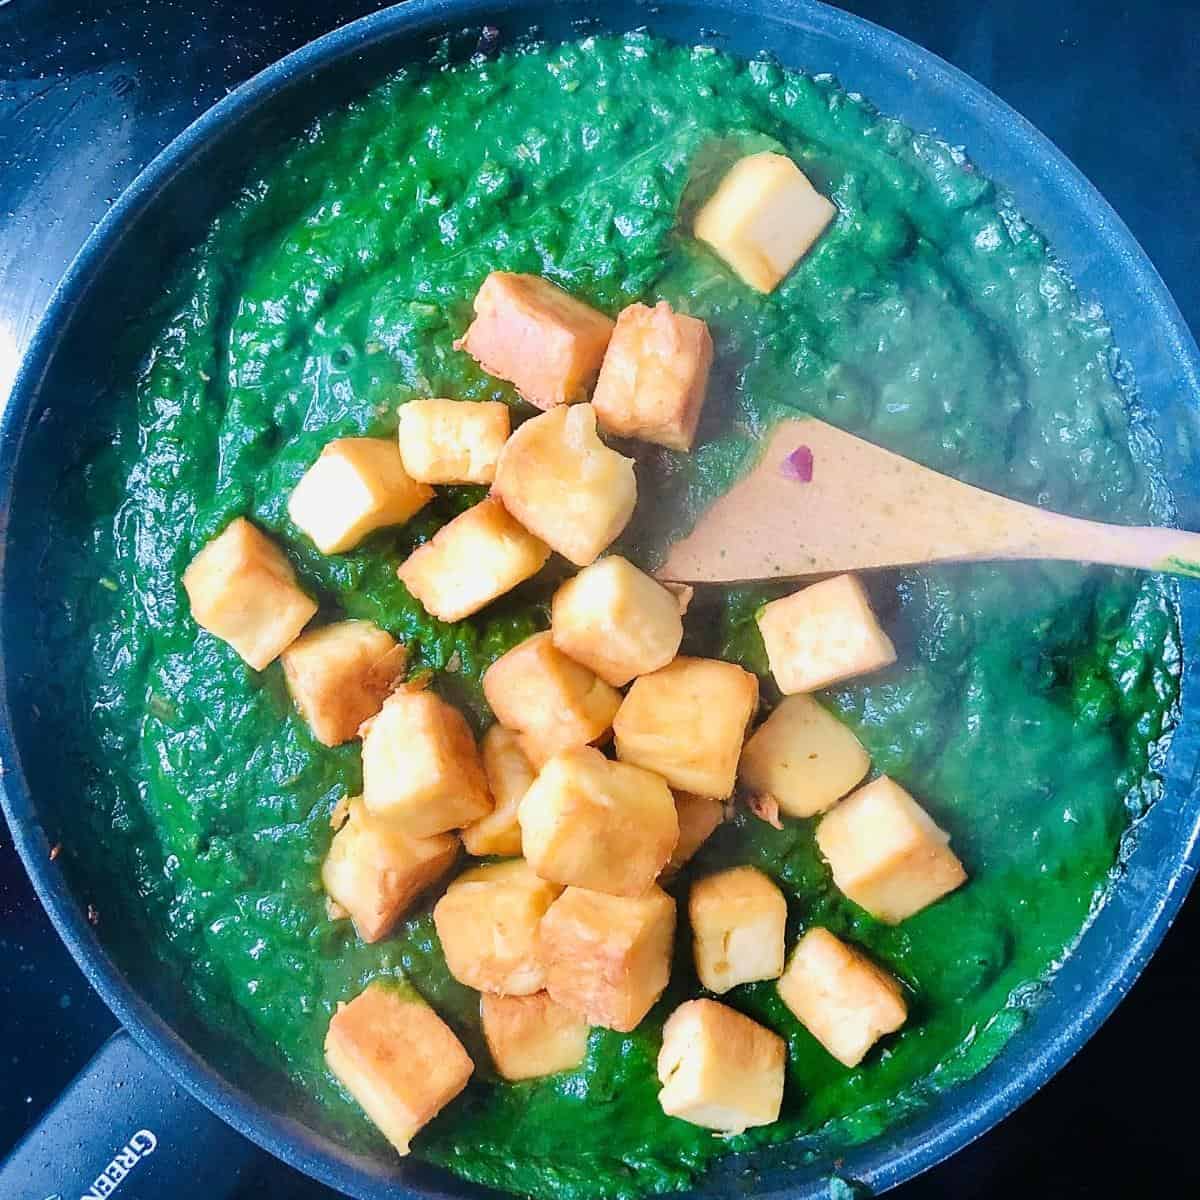 Fried gram flour paneer cubes added to the palak paneer base mix